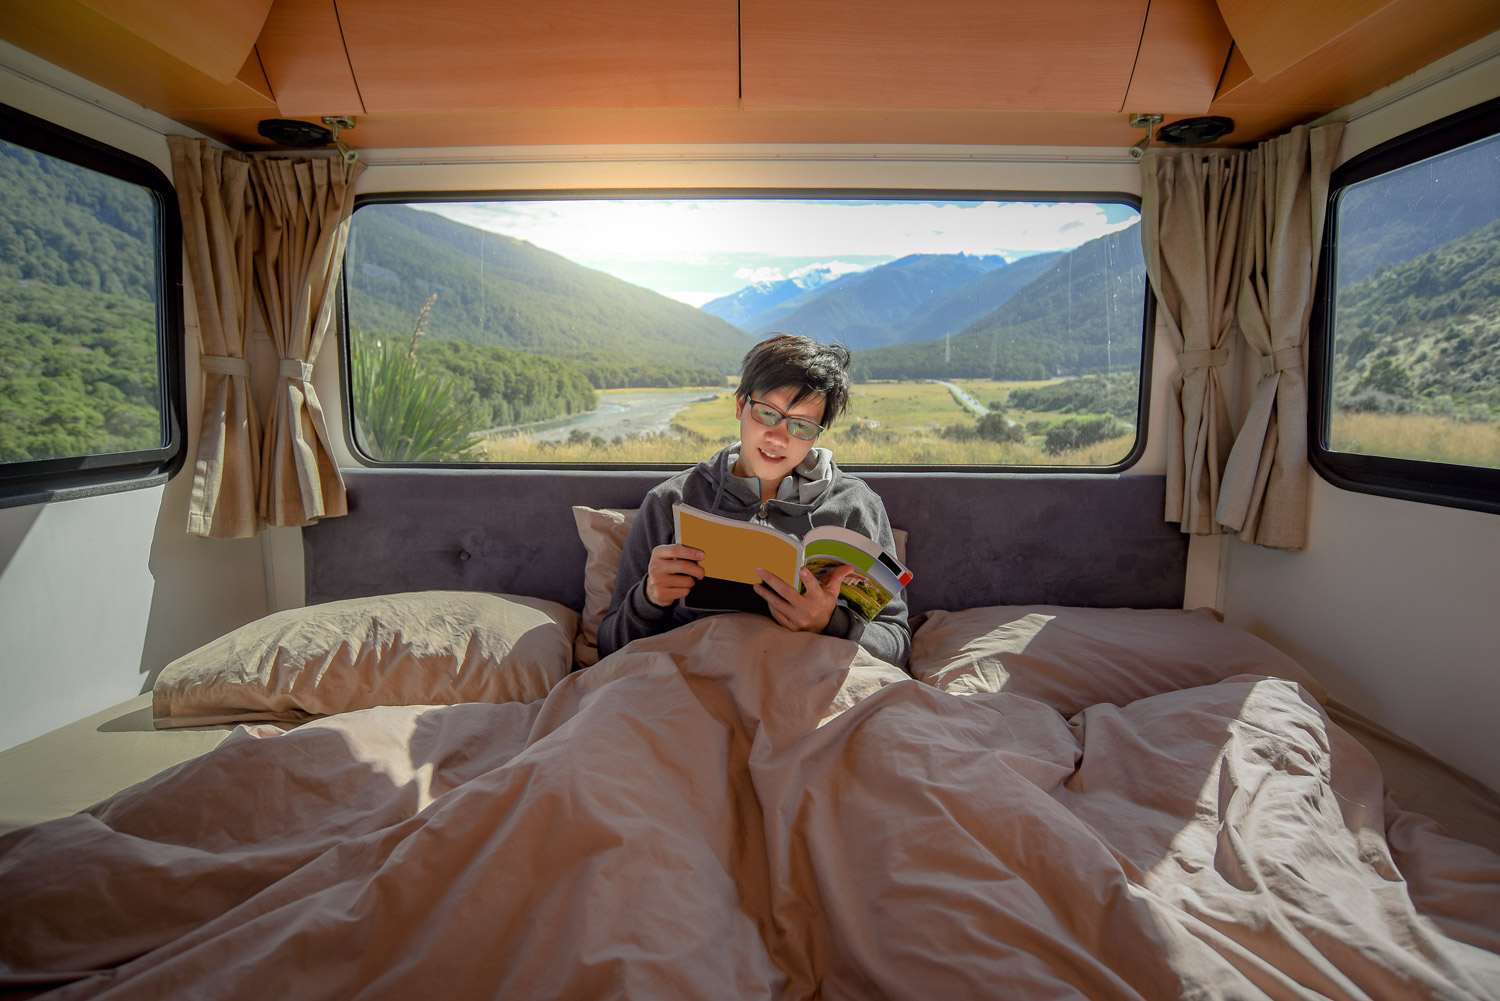 A man reads a book in his RV. We list our RVing and camping books in this blog.